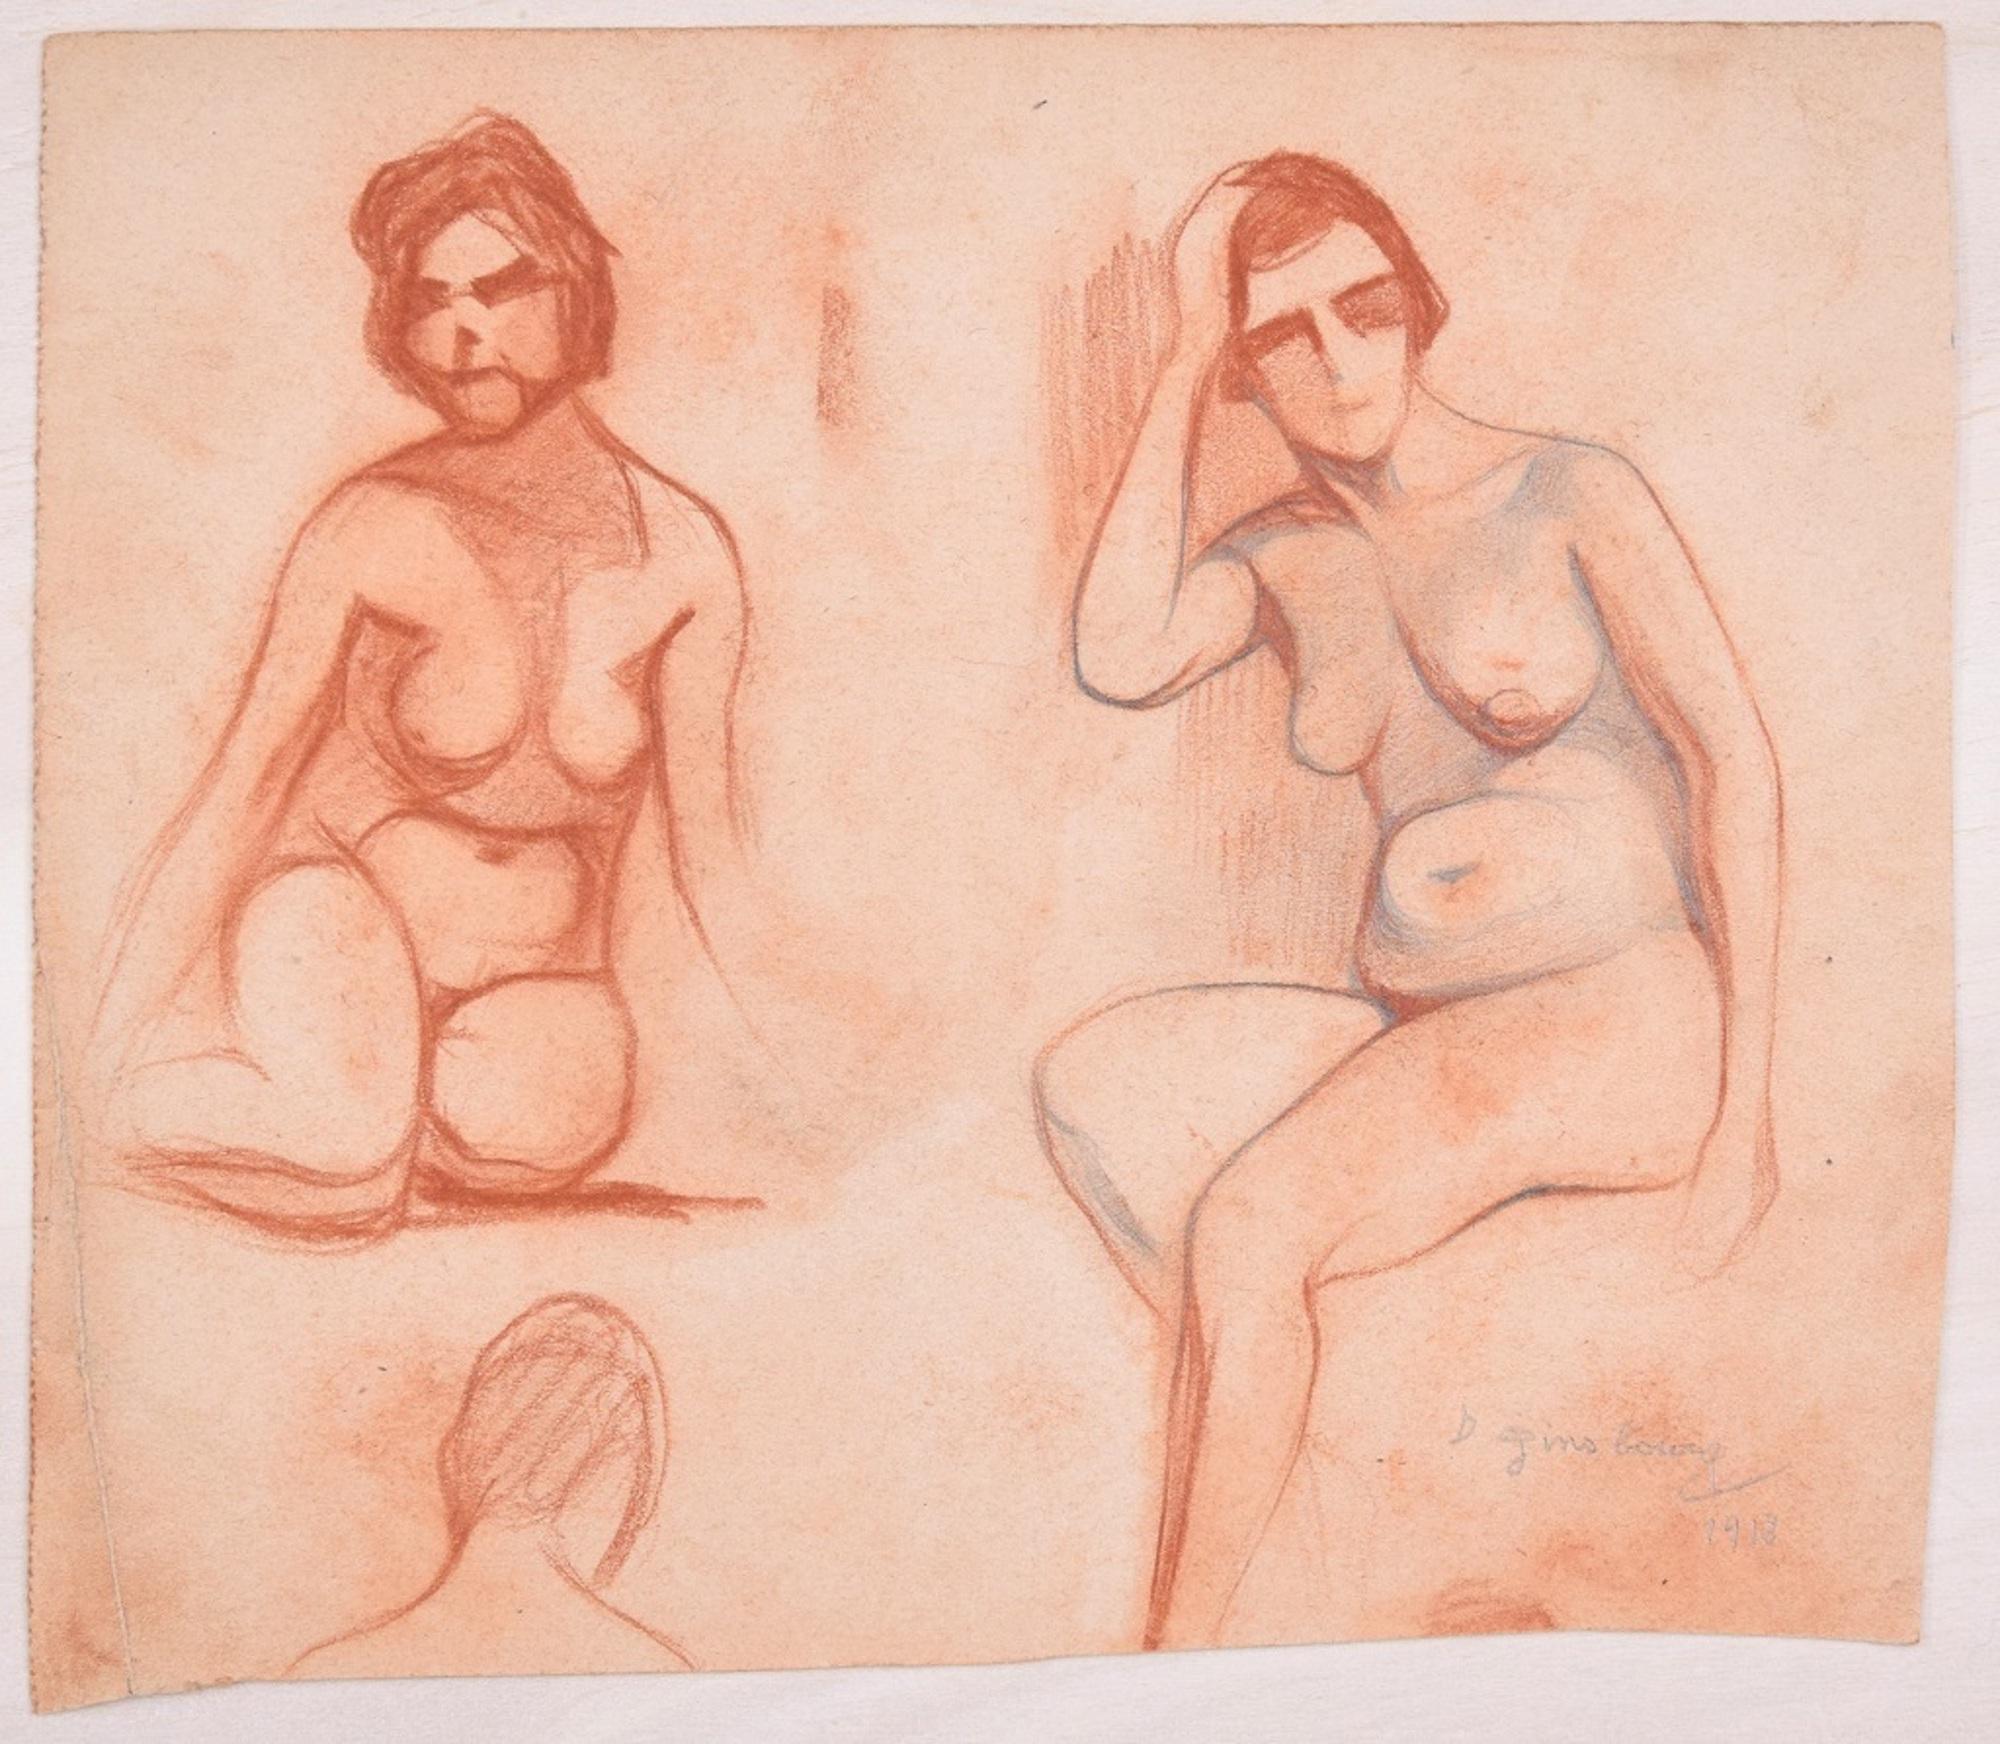 Daniel Ginsbourg Figurative Art - Studies for Female Nudes - Original Pencil Drawing by D. Ginsbourg - 1918